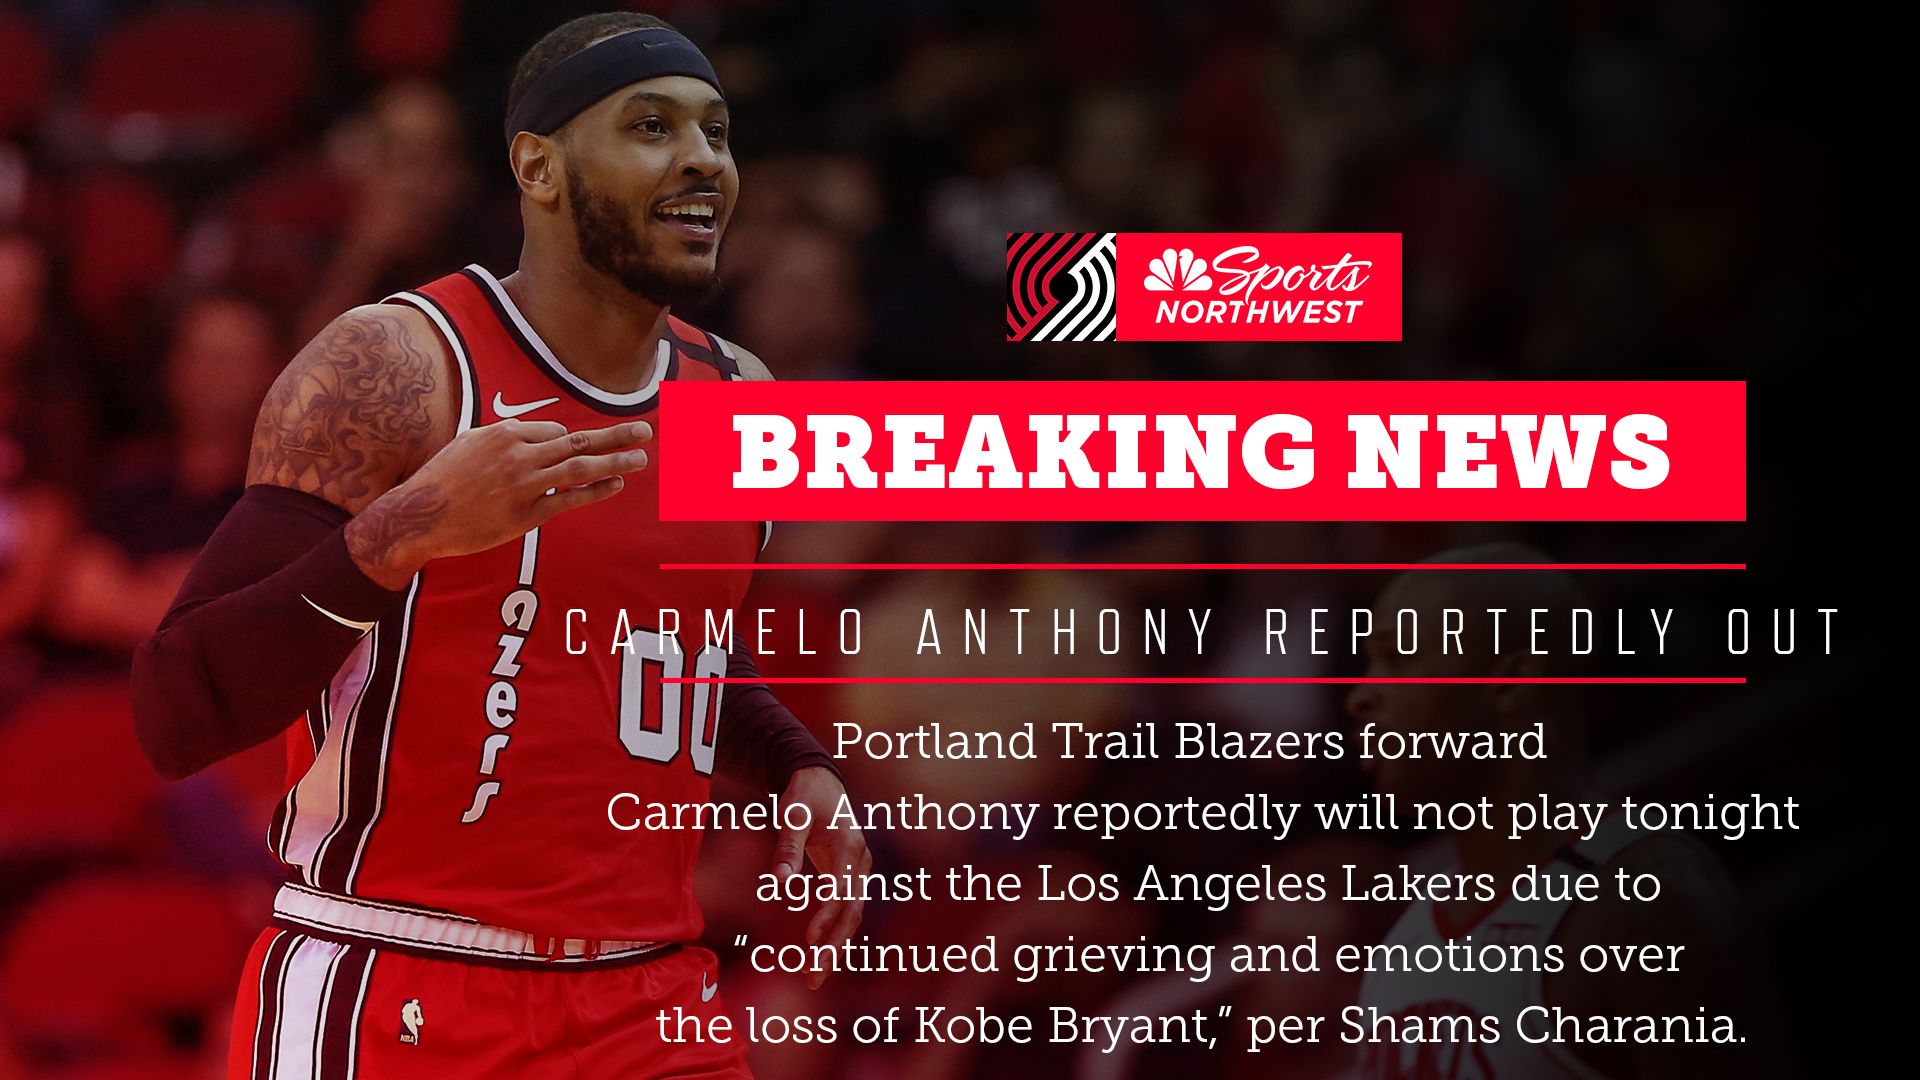 REPORT: Carmelo Anthony not expected to play against the Los